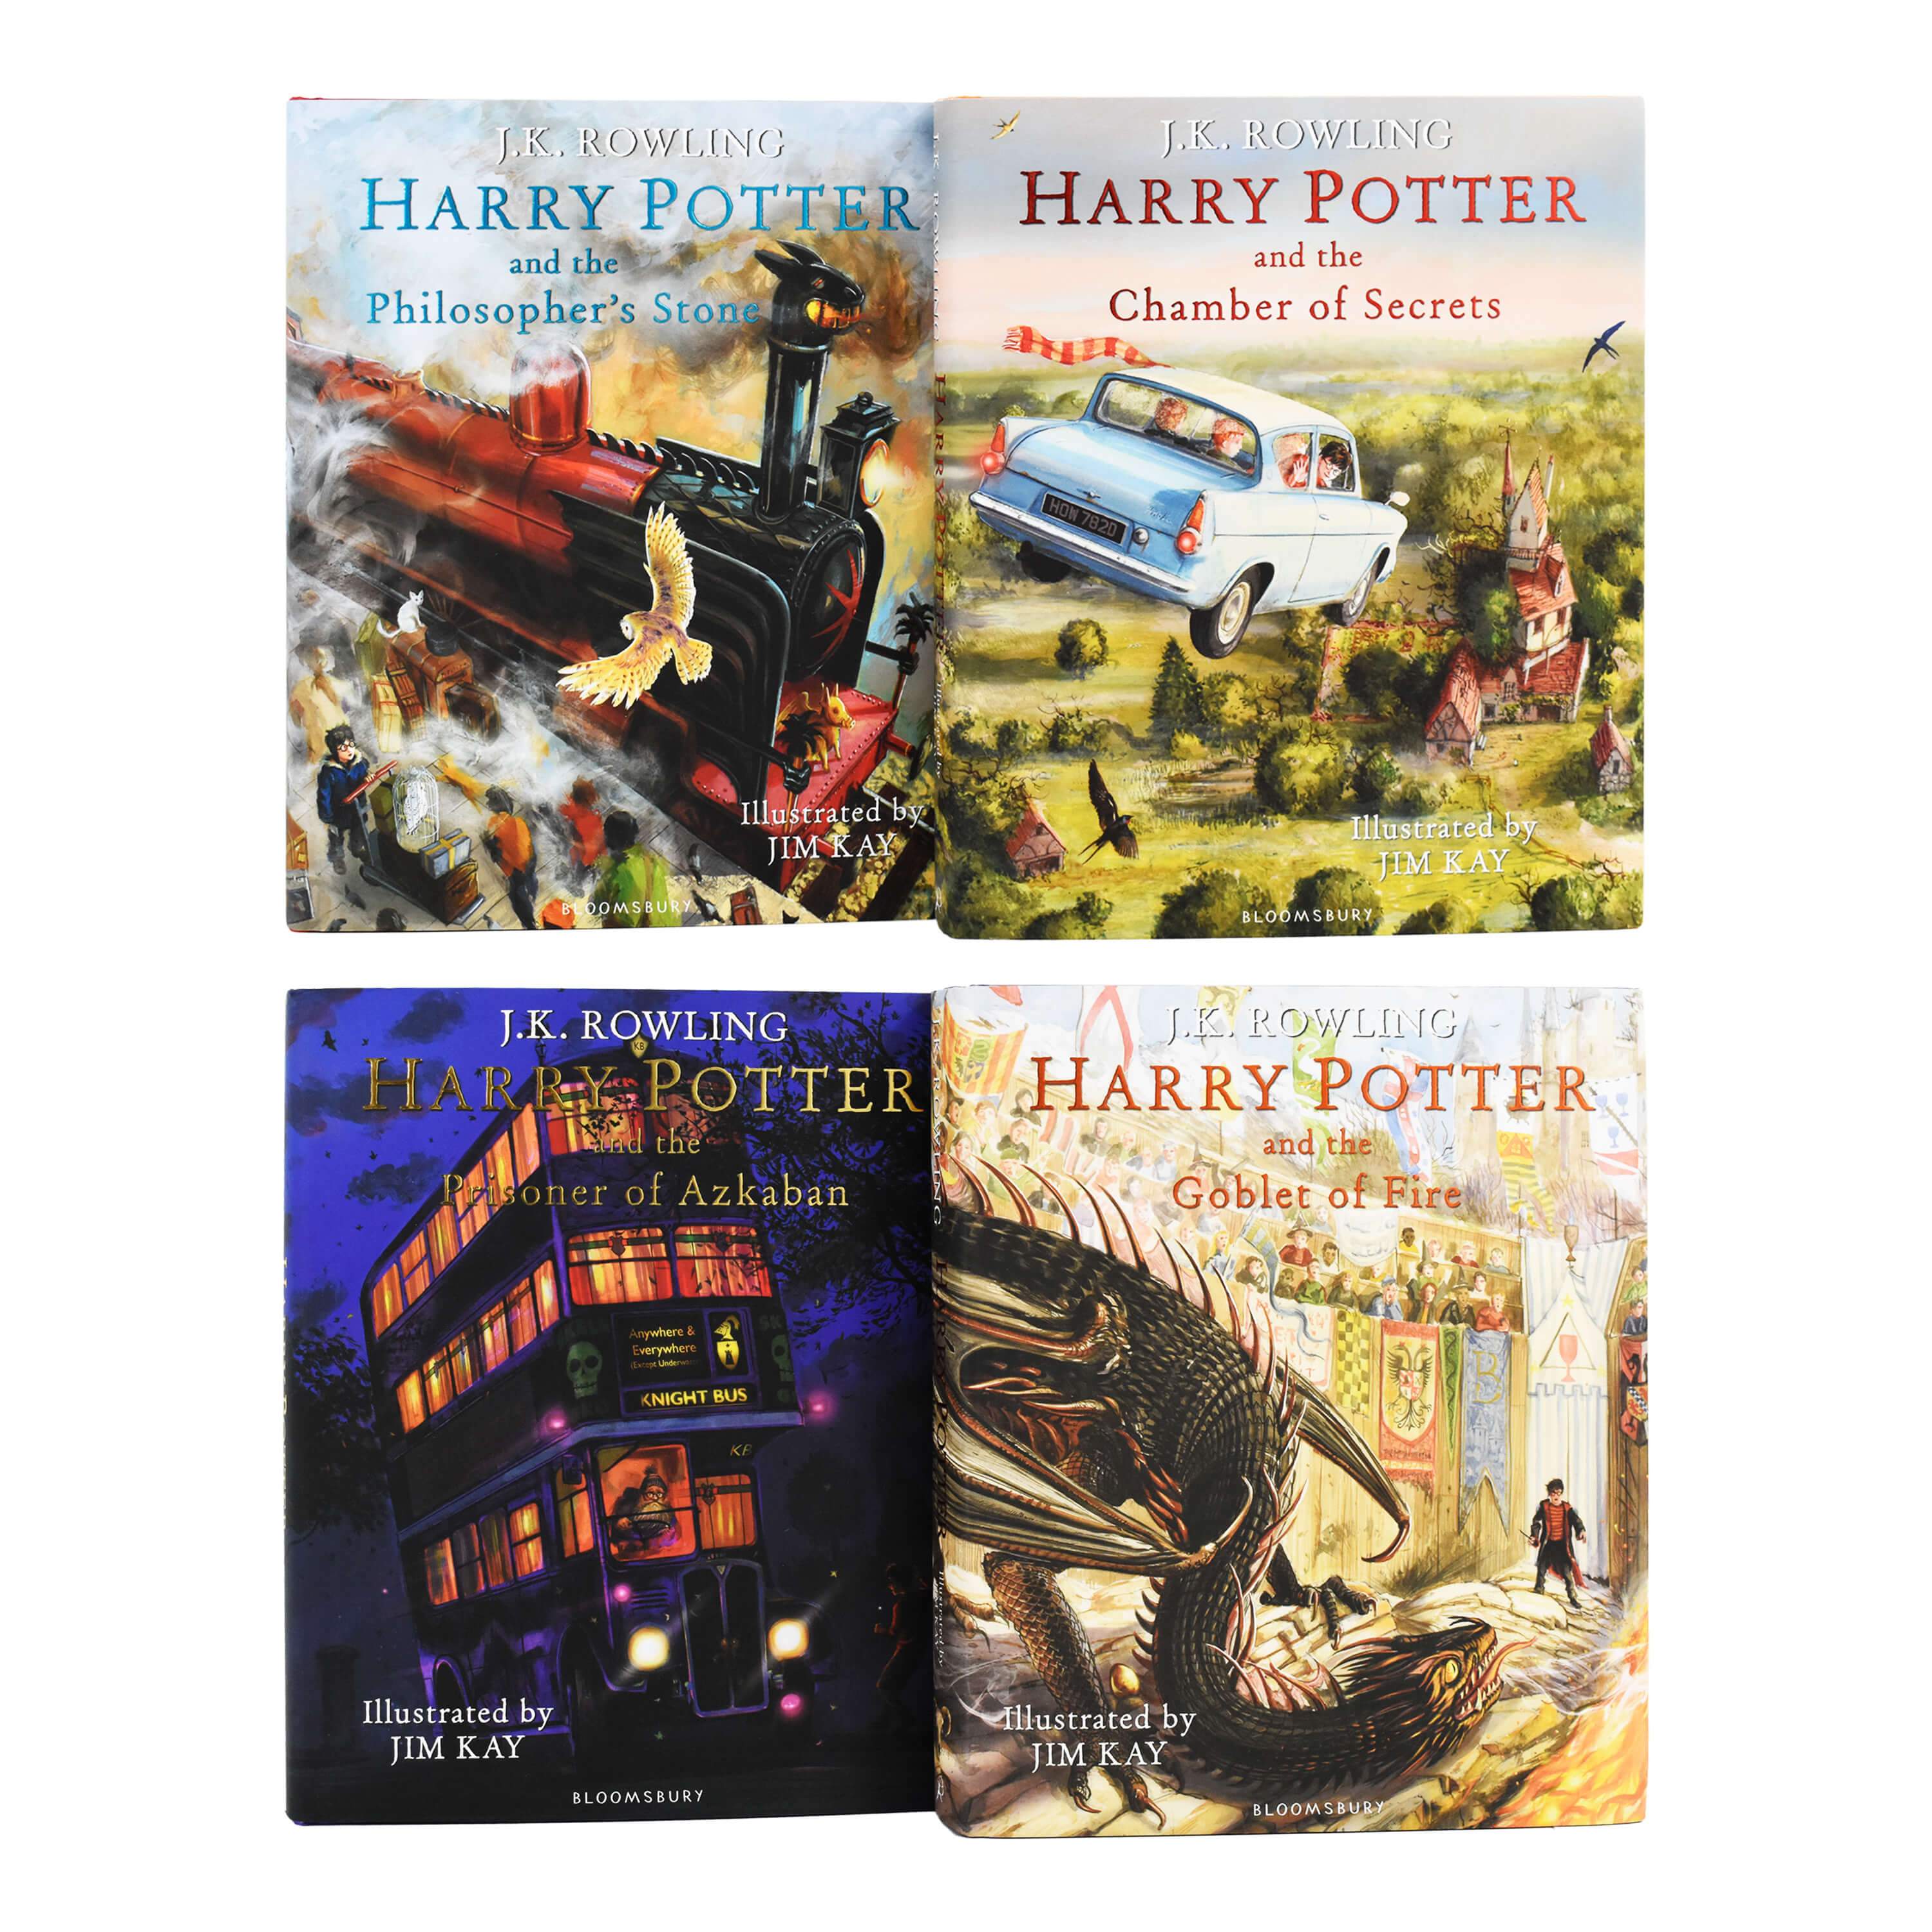 The Best Harry Potter Illustrated Books - by Kelsey Boyanzhu  Harry potter  illustrated book, Harry potter illustrations, Harry potter book covers